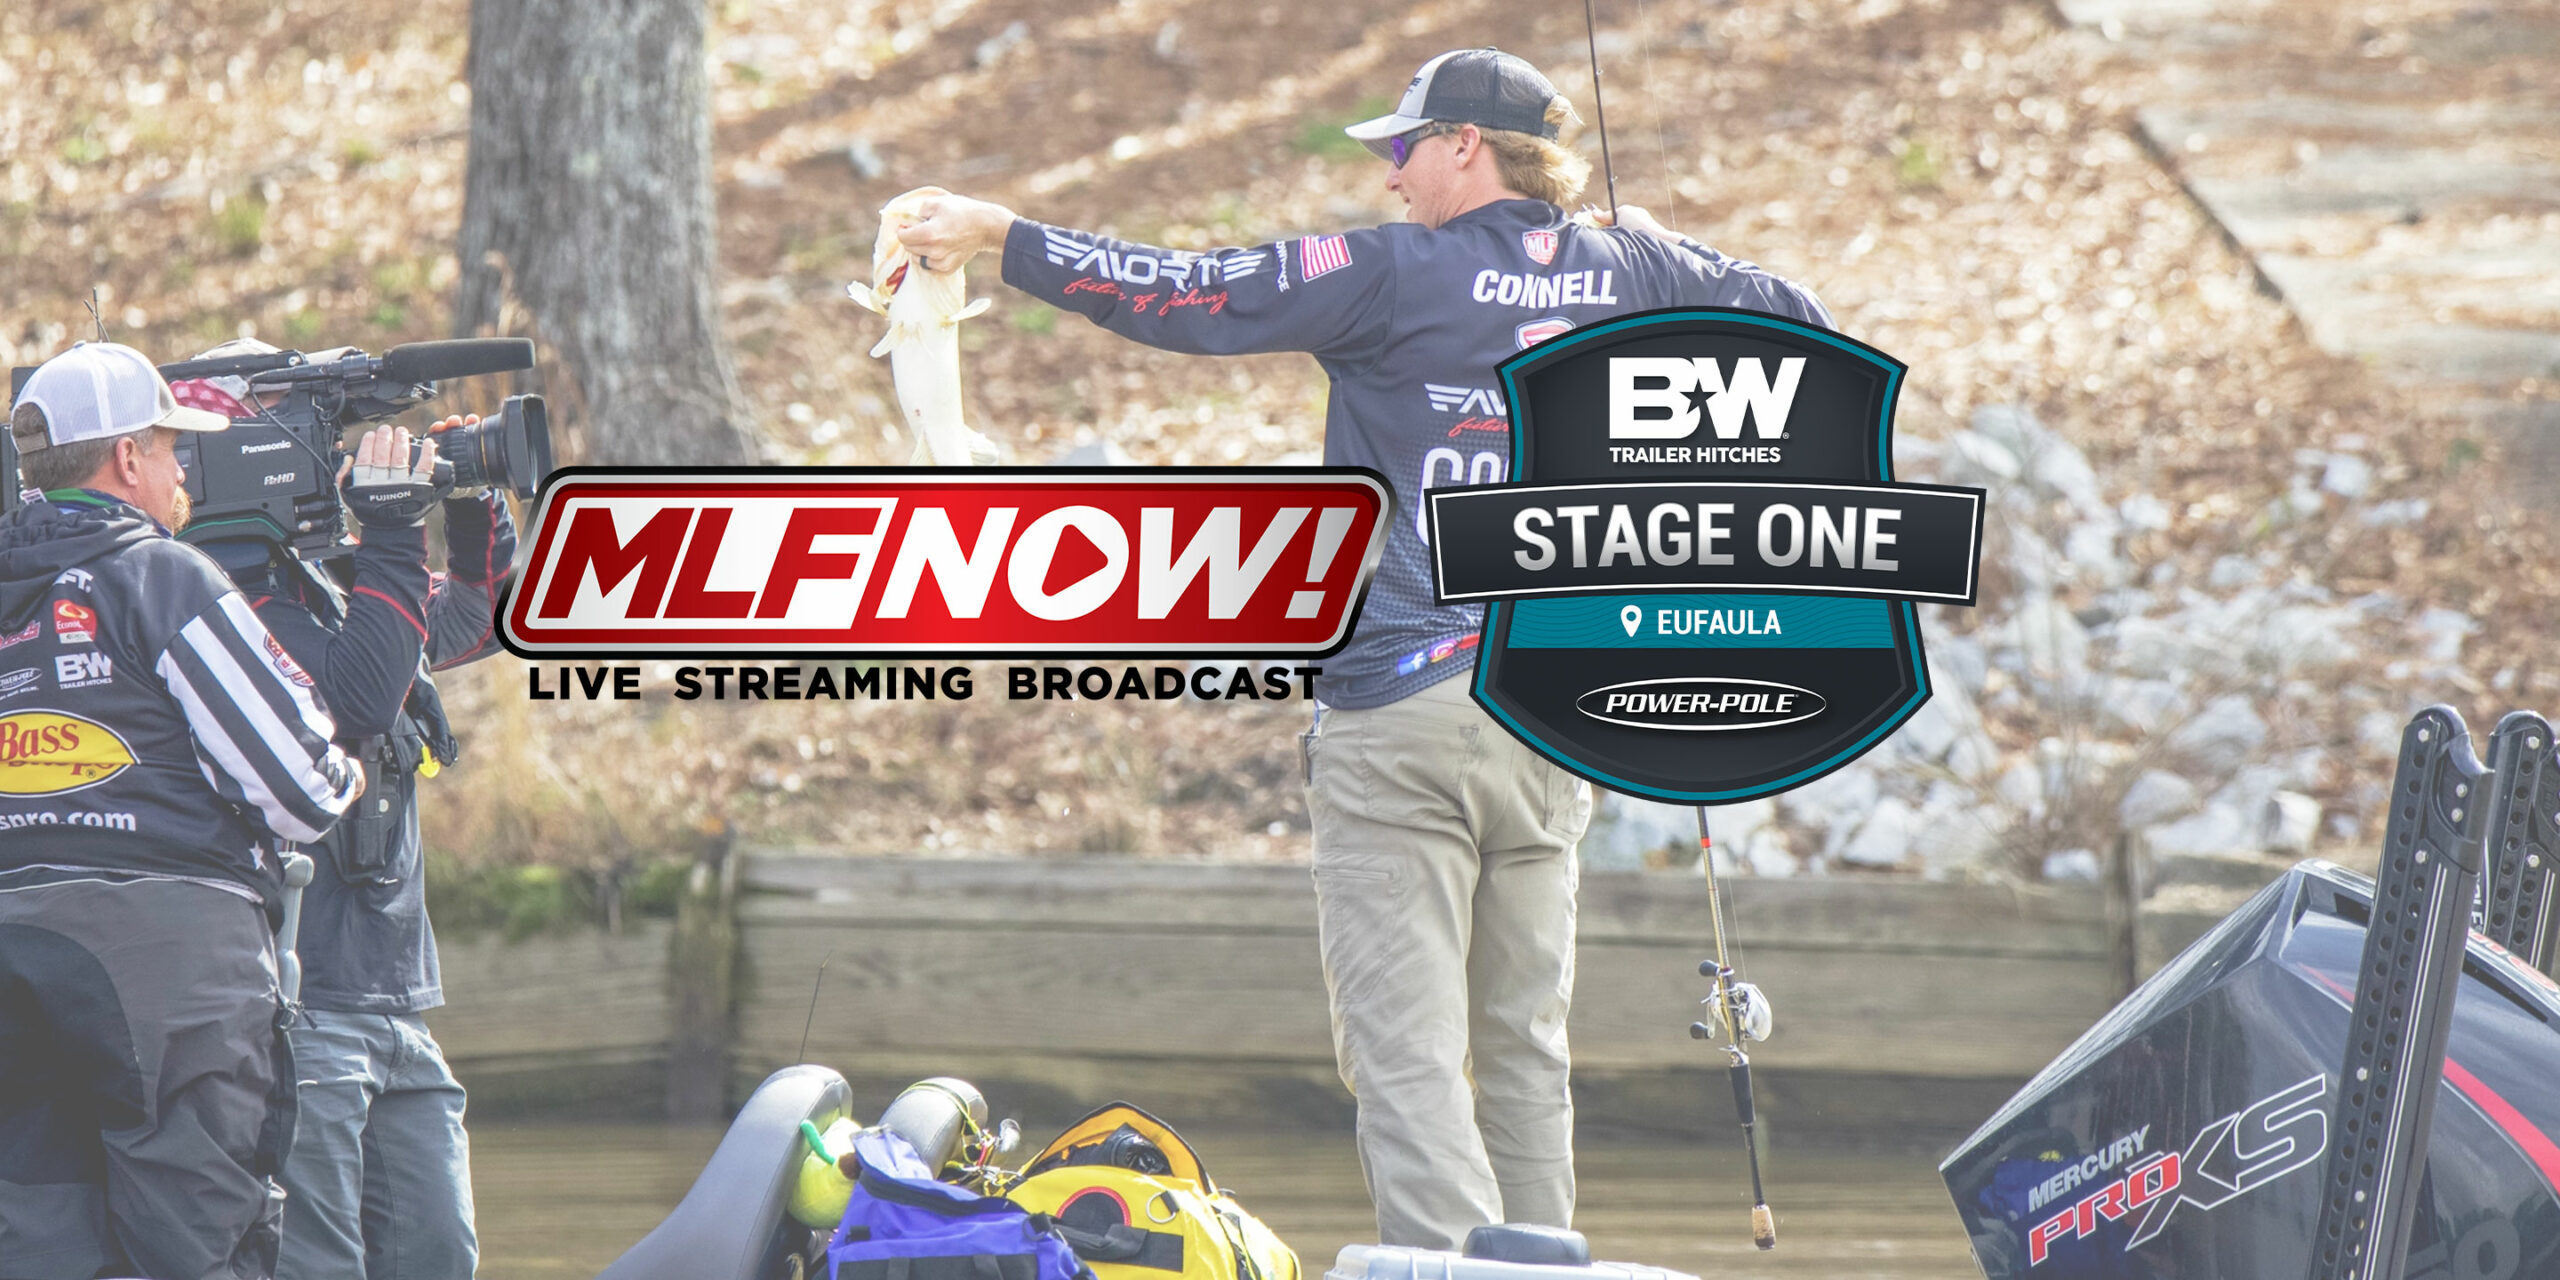 Bass Pro Tour Stage One Championship Round MLF NOW! Live Stream (Part 2)